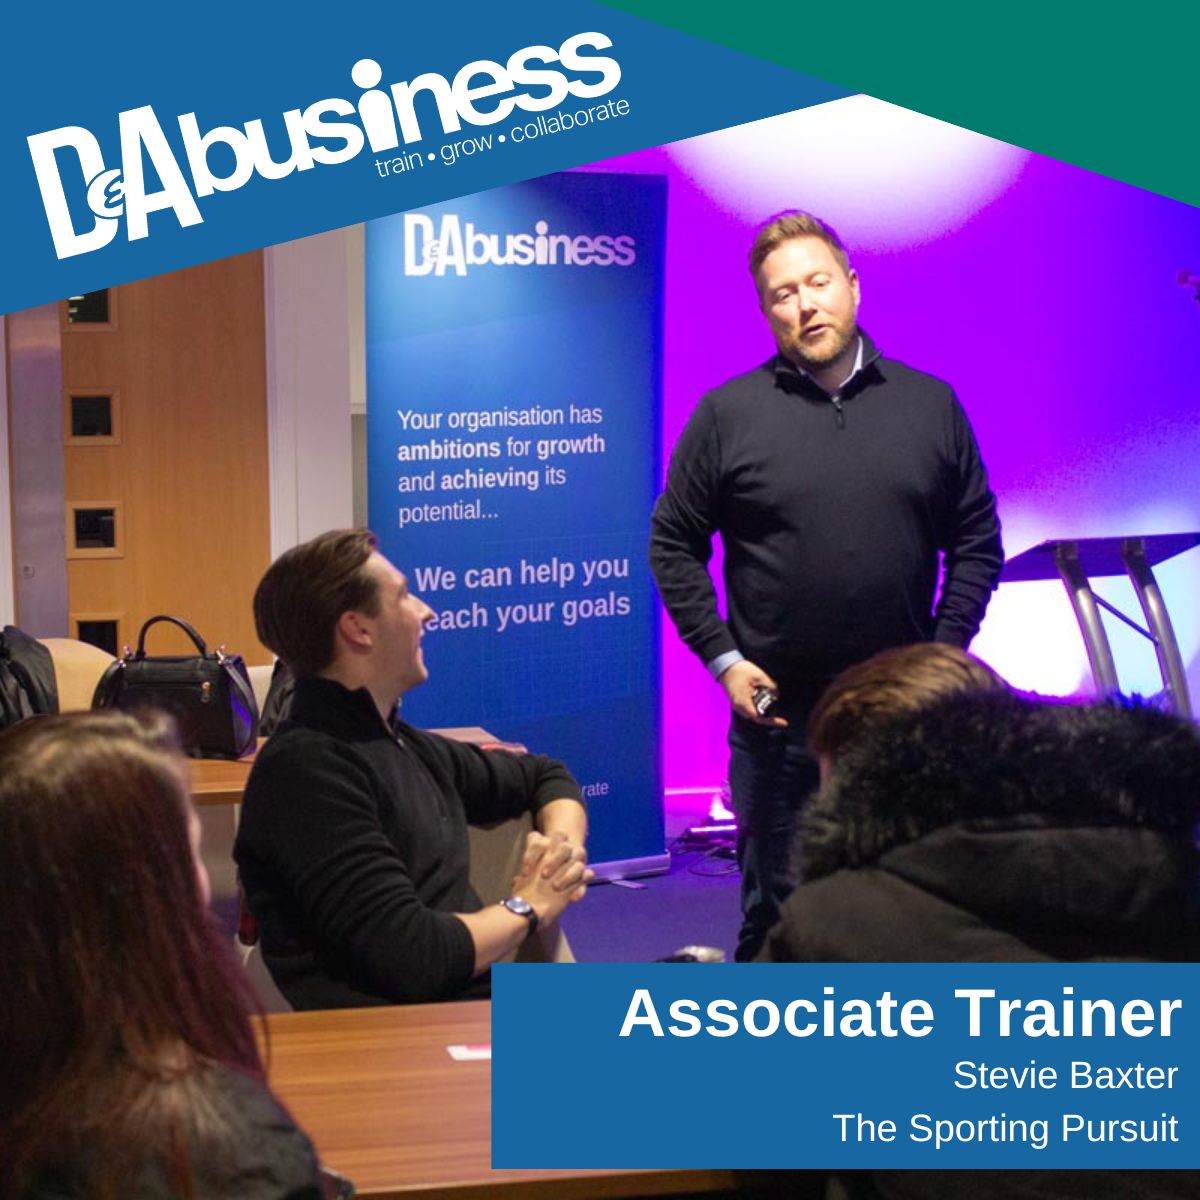 Stevie Baxter at @TSportingP is one of the brilliant associate trainers we work with who delivers #leadershiptraining to businesses across the country 🤝 Stevie kindly spoke to us about his thoughts on working with the college: pulse.ly/z1a4vmkiz9 #DABusiness